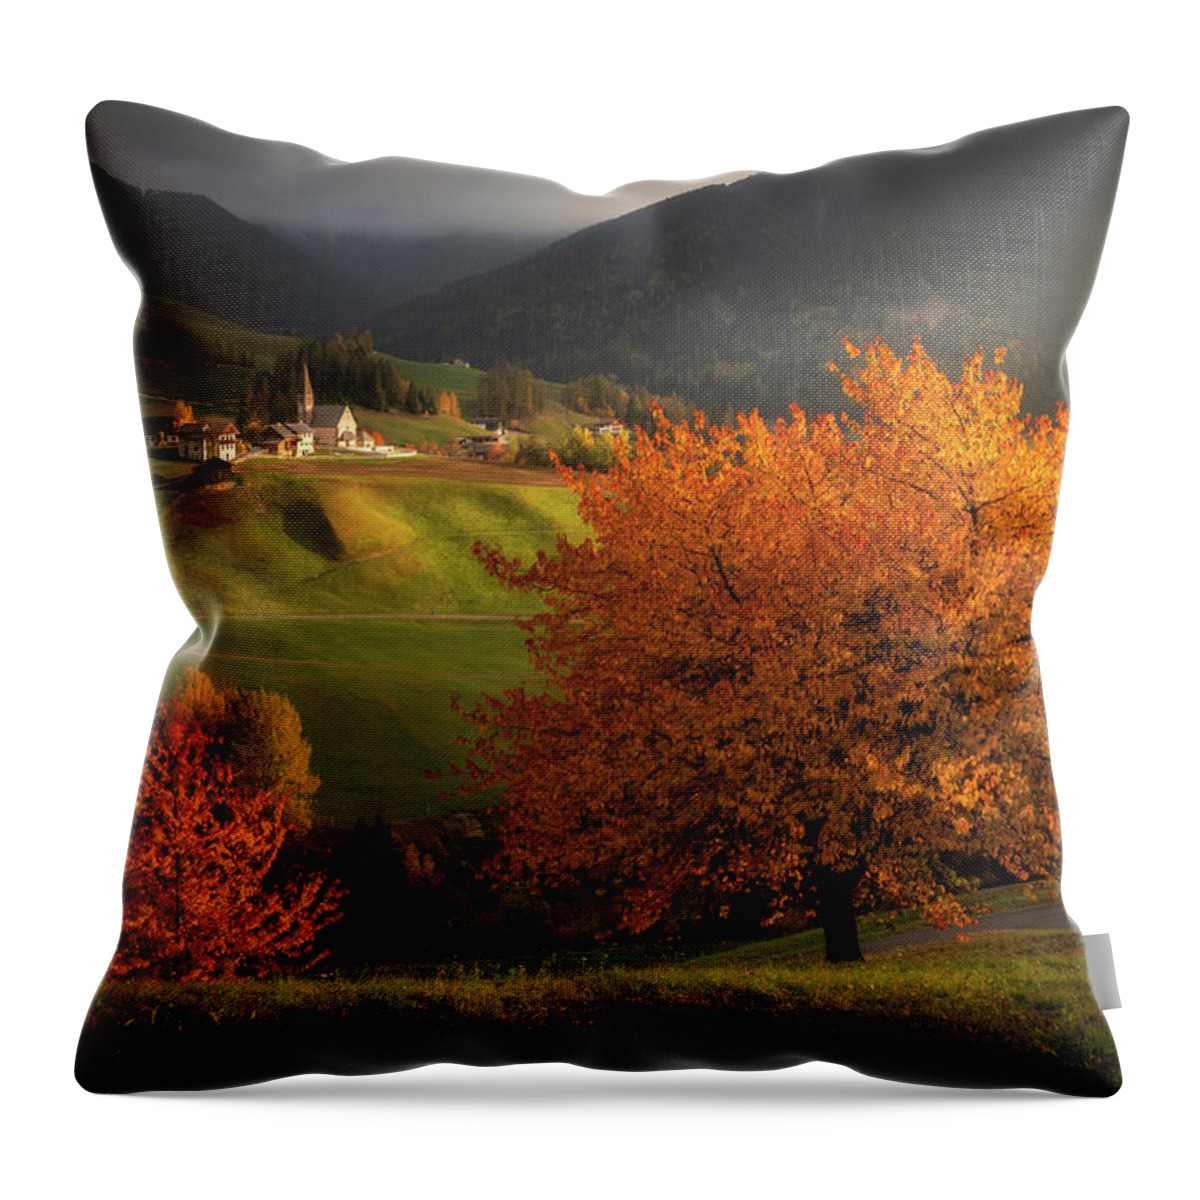 The Alps Throw Pillow featuring the photograph Autumn in the Alps by Piotr Skrzypiec